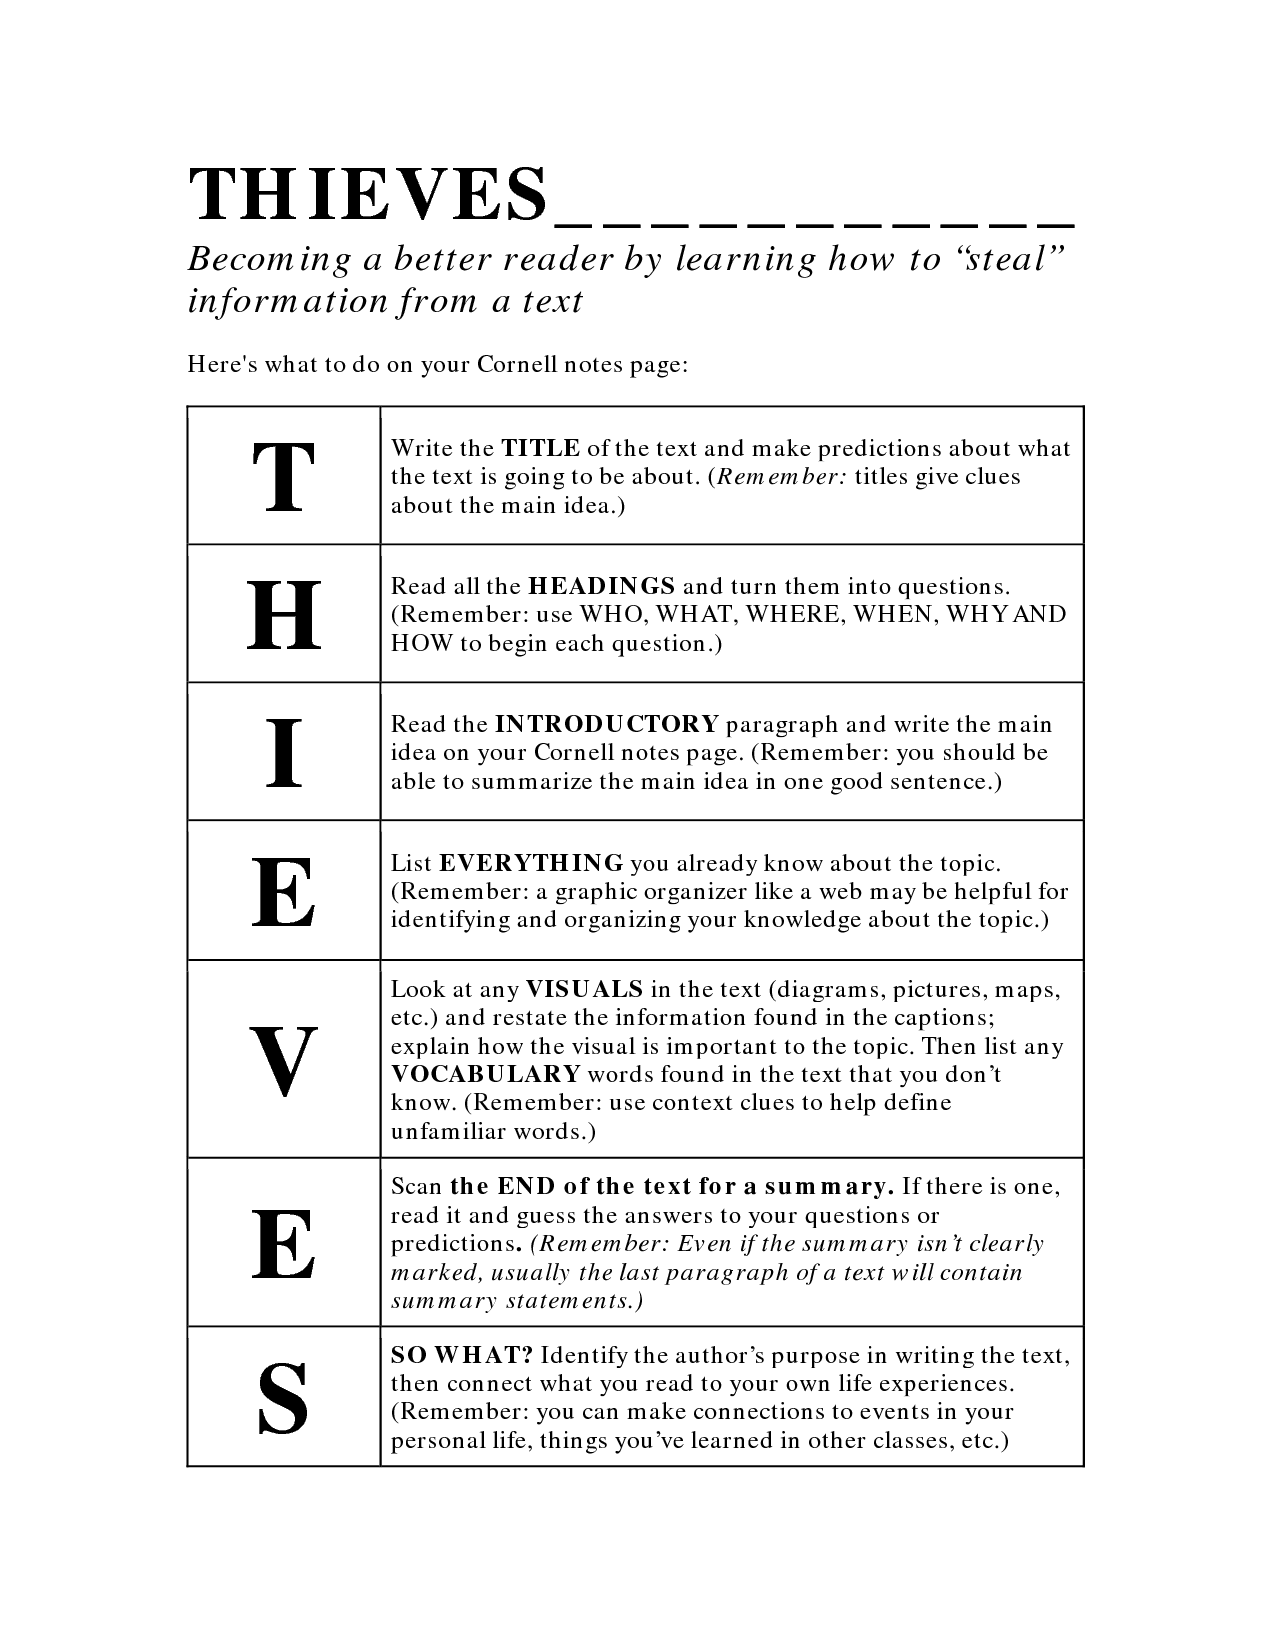 Thieves Reading Strategy Image